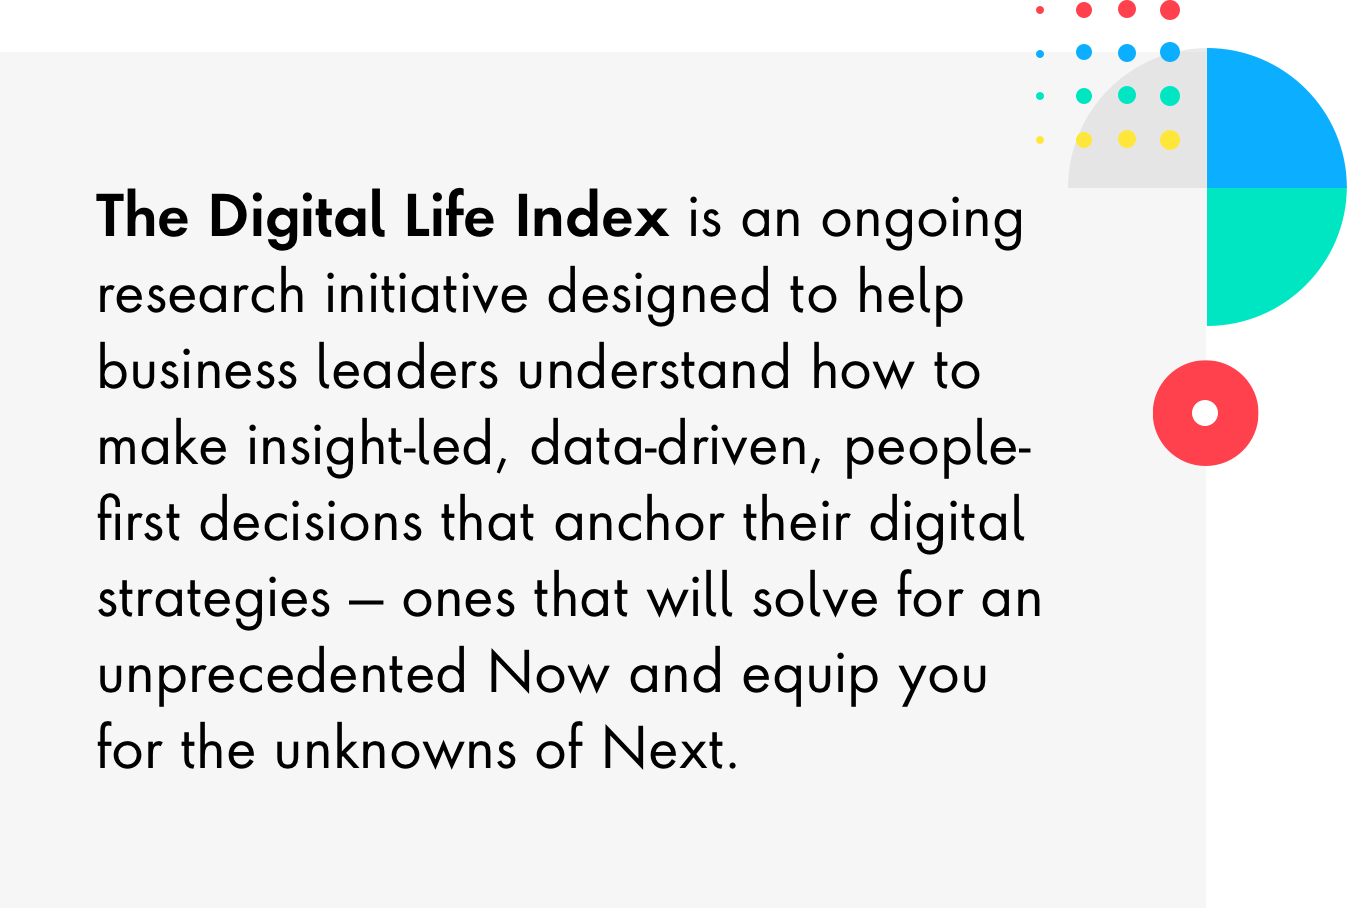 The Digital Life index is an ongoing research initiative designed to help business leaders understand how to make insight-led, data-driven, people-first decisions that anchor their digital strategies.